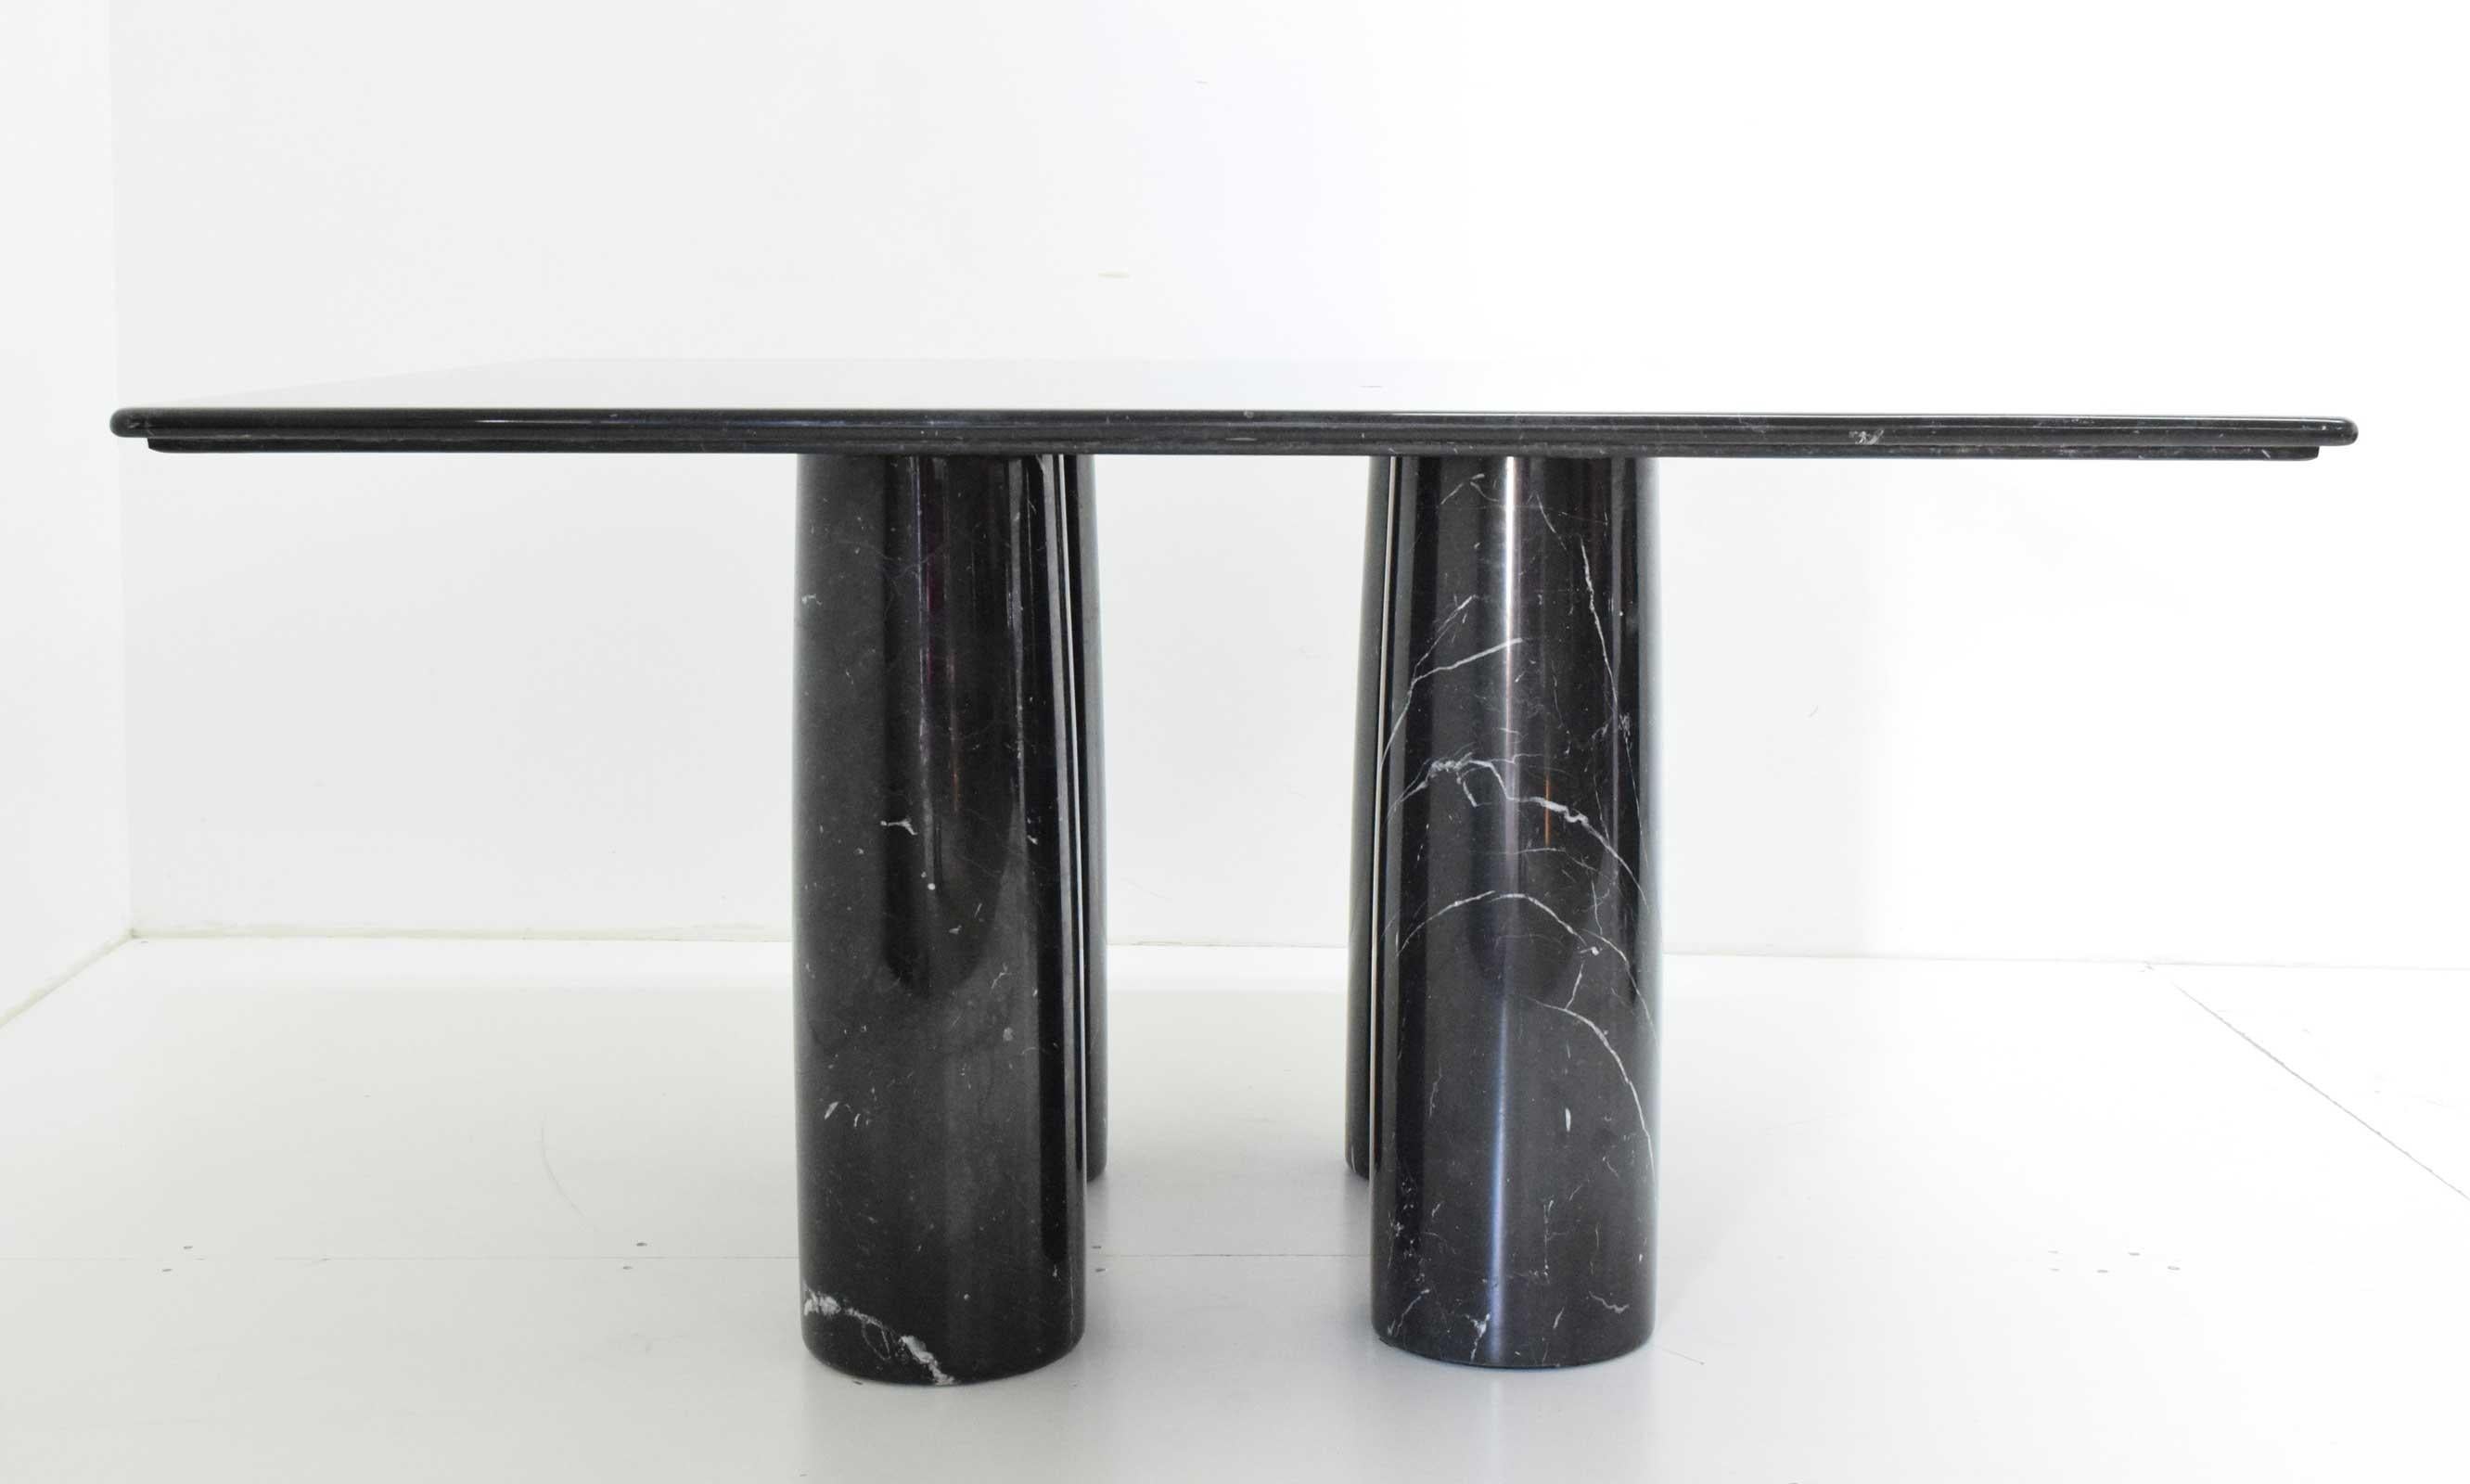 This monumental table by Milanese architect Mario Bellini is made purely from solid Nero Marquina marble.
The square top with a reversed step edge profile rests elegantly on four cylindrical columns that can be placed randomly.
For the 'Il